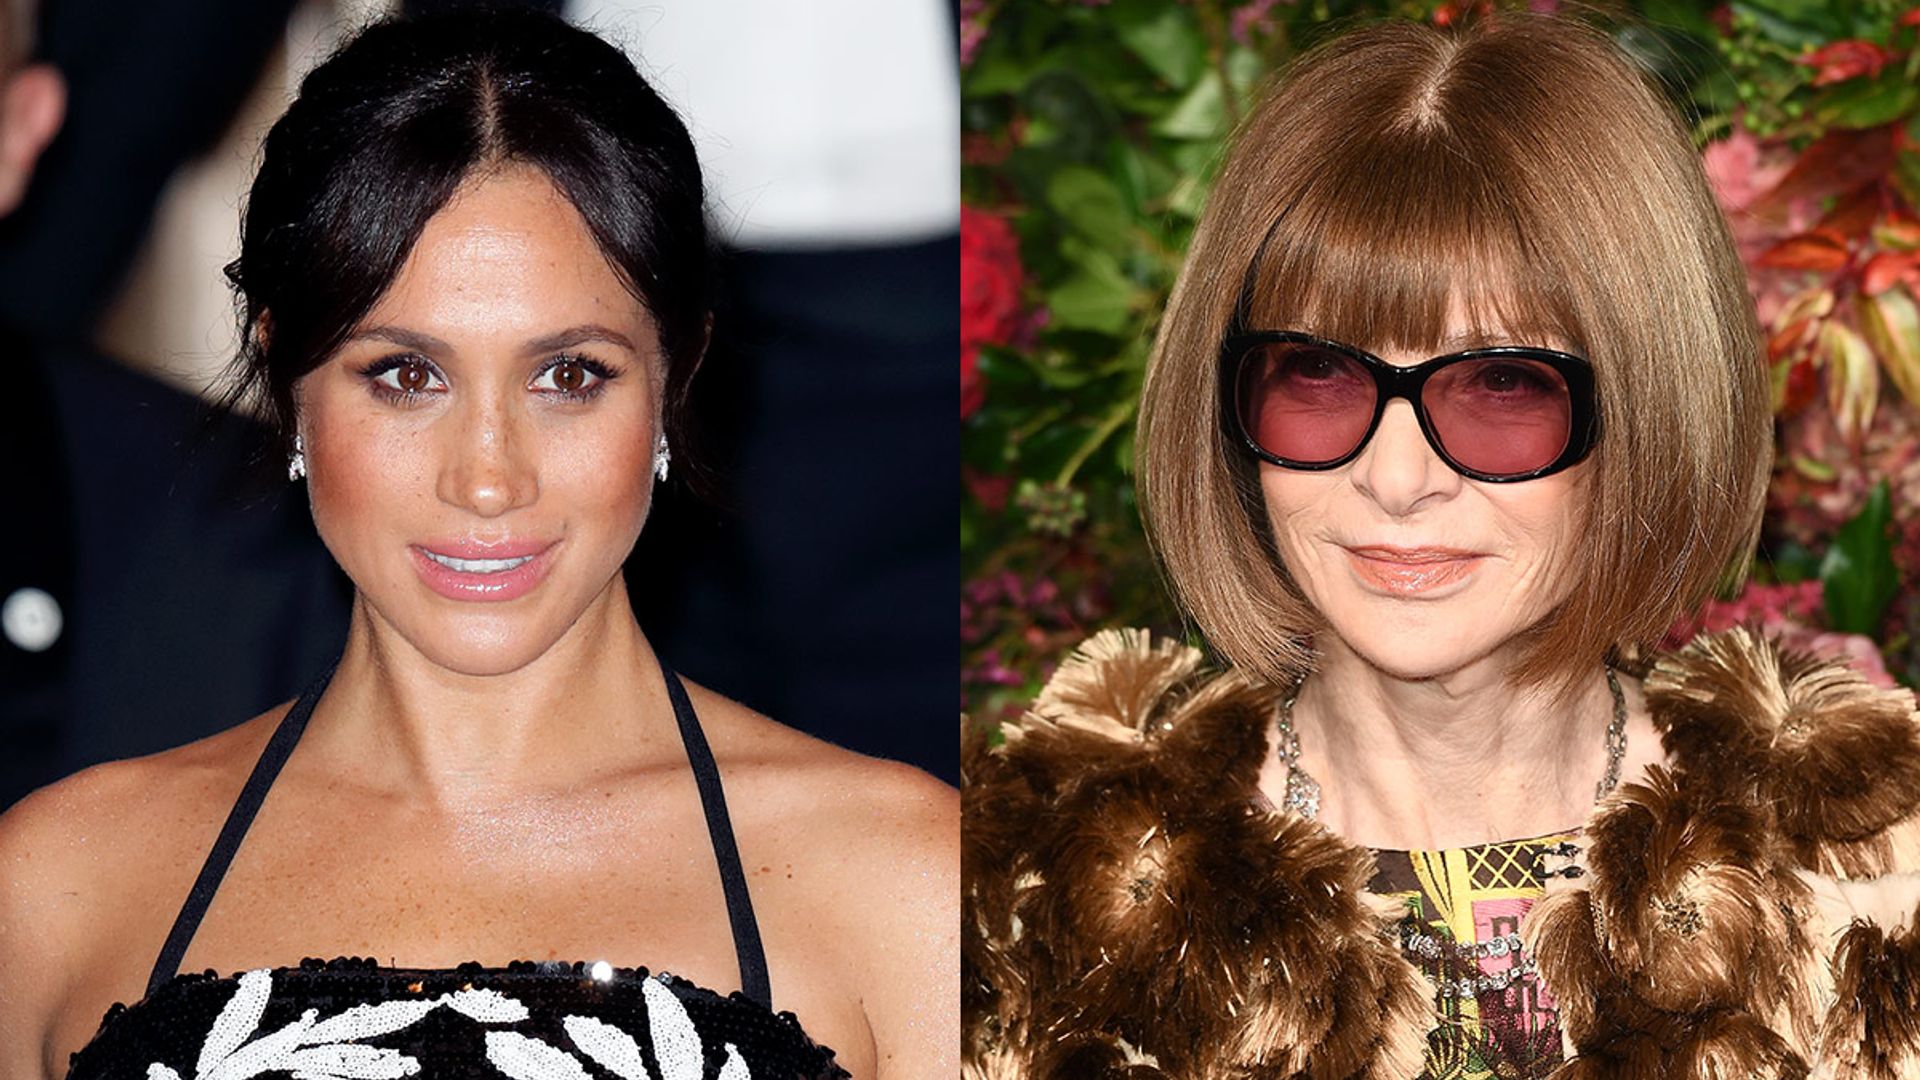 Anna Wintour had THIS to say about the Duchess of Sussex's style